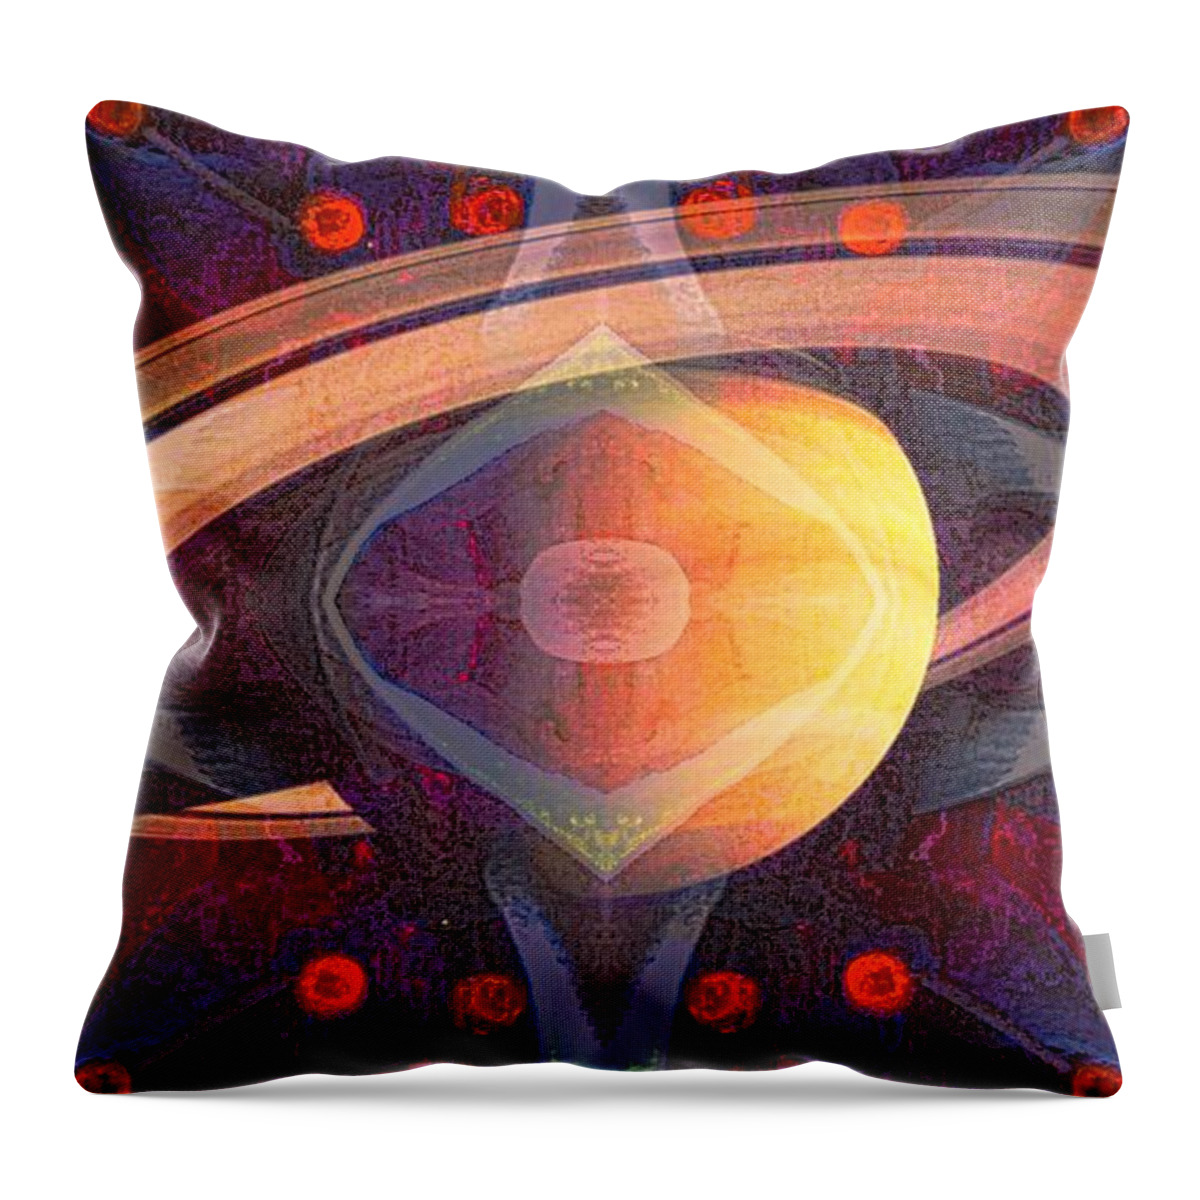 Space Flower Throw Pillow featuring the digital art Floral Space by Glenn Hernandez